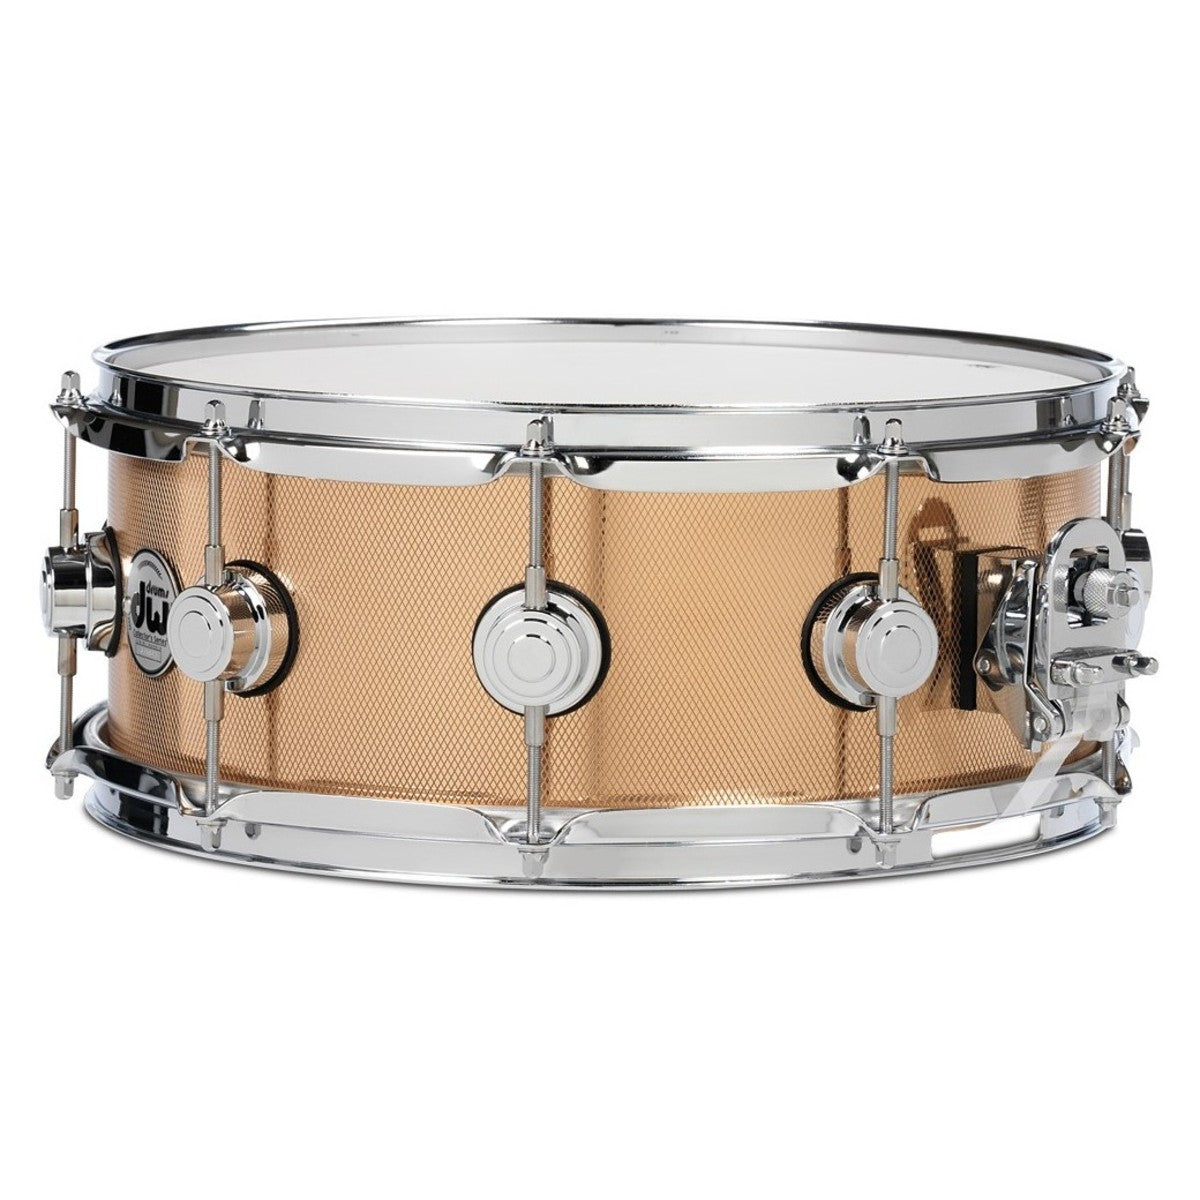 DW Collector's Series Knurled Bronze Snare - 5.5" x 14"